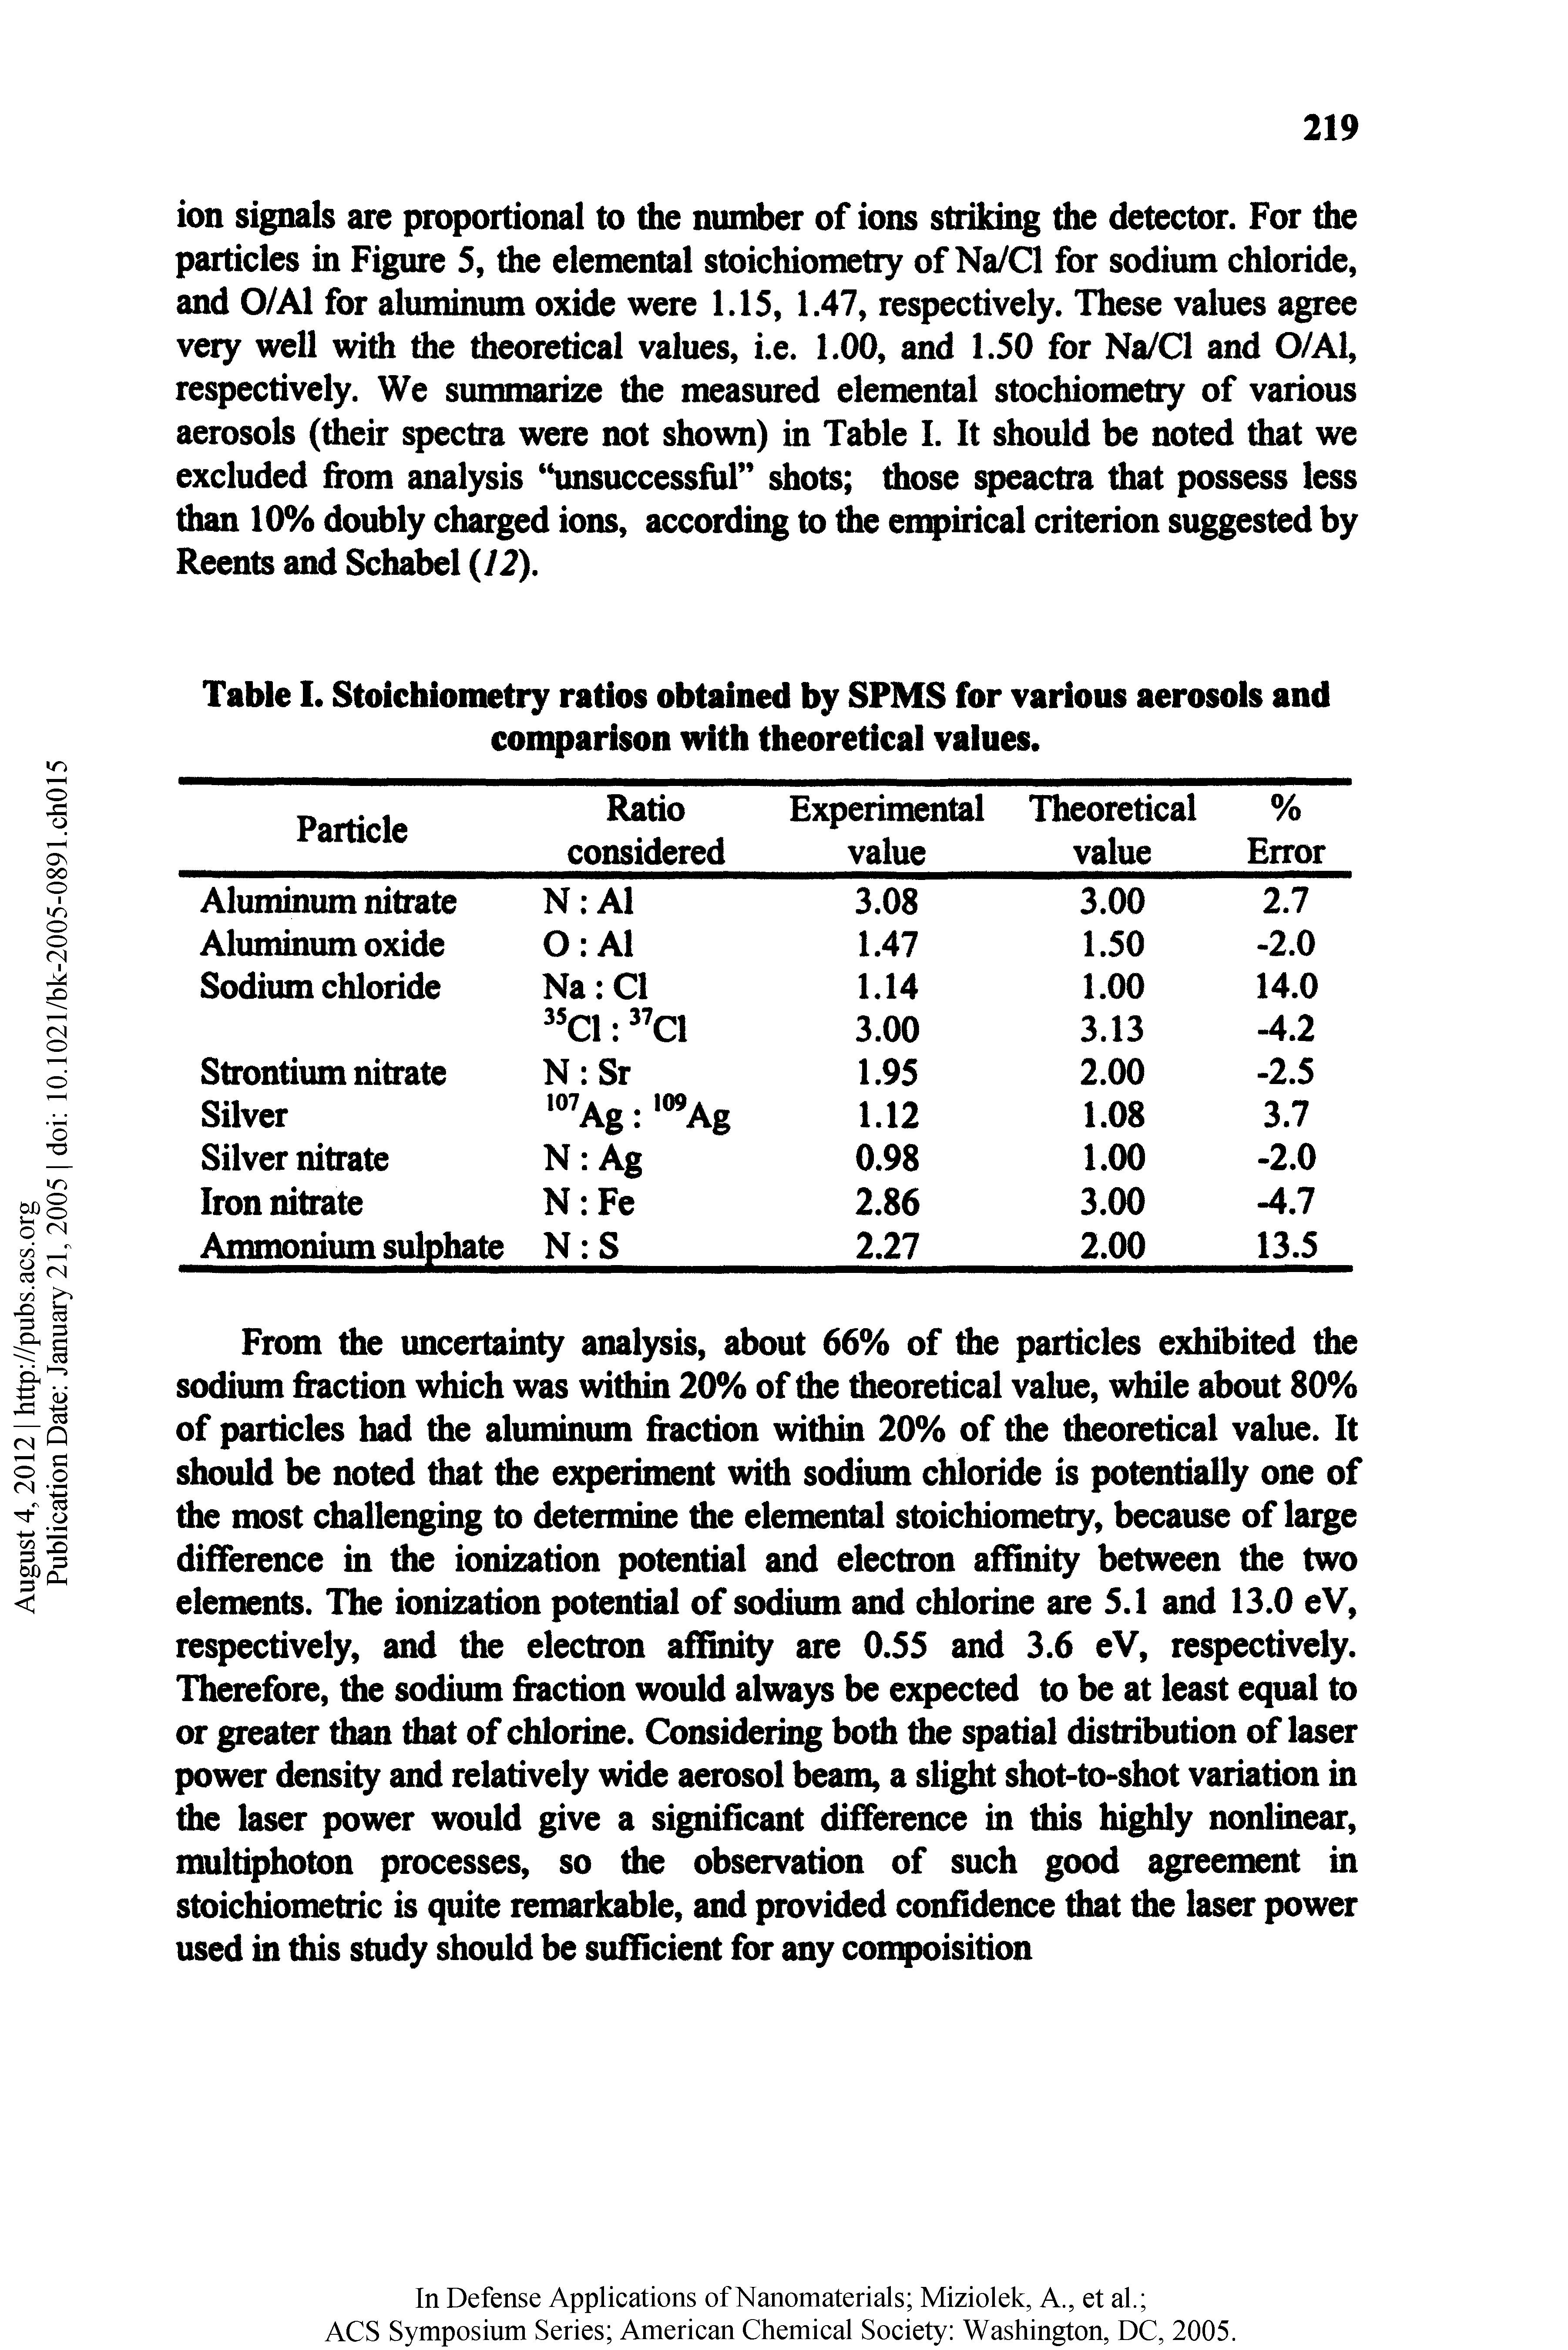 Table I. Stoichiometry ratios obtained by SPMS for various aerosois and conqtarison with theoretical vaiues.